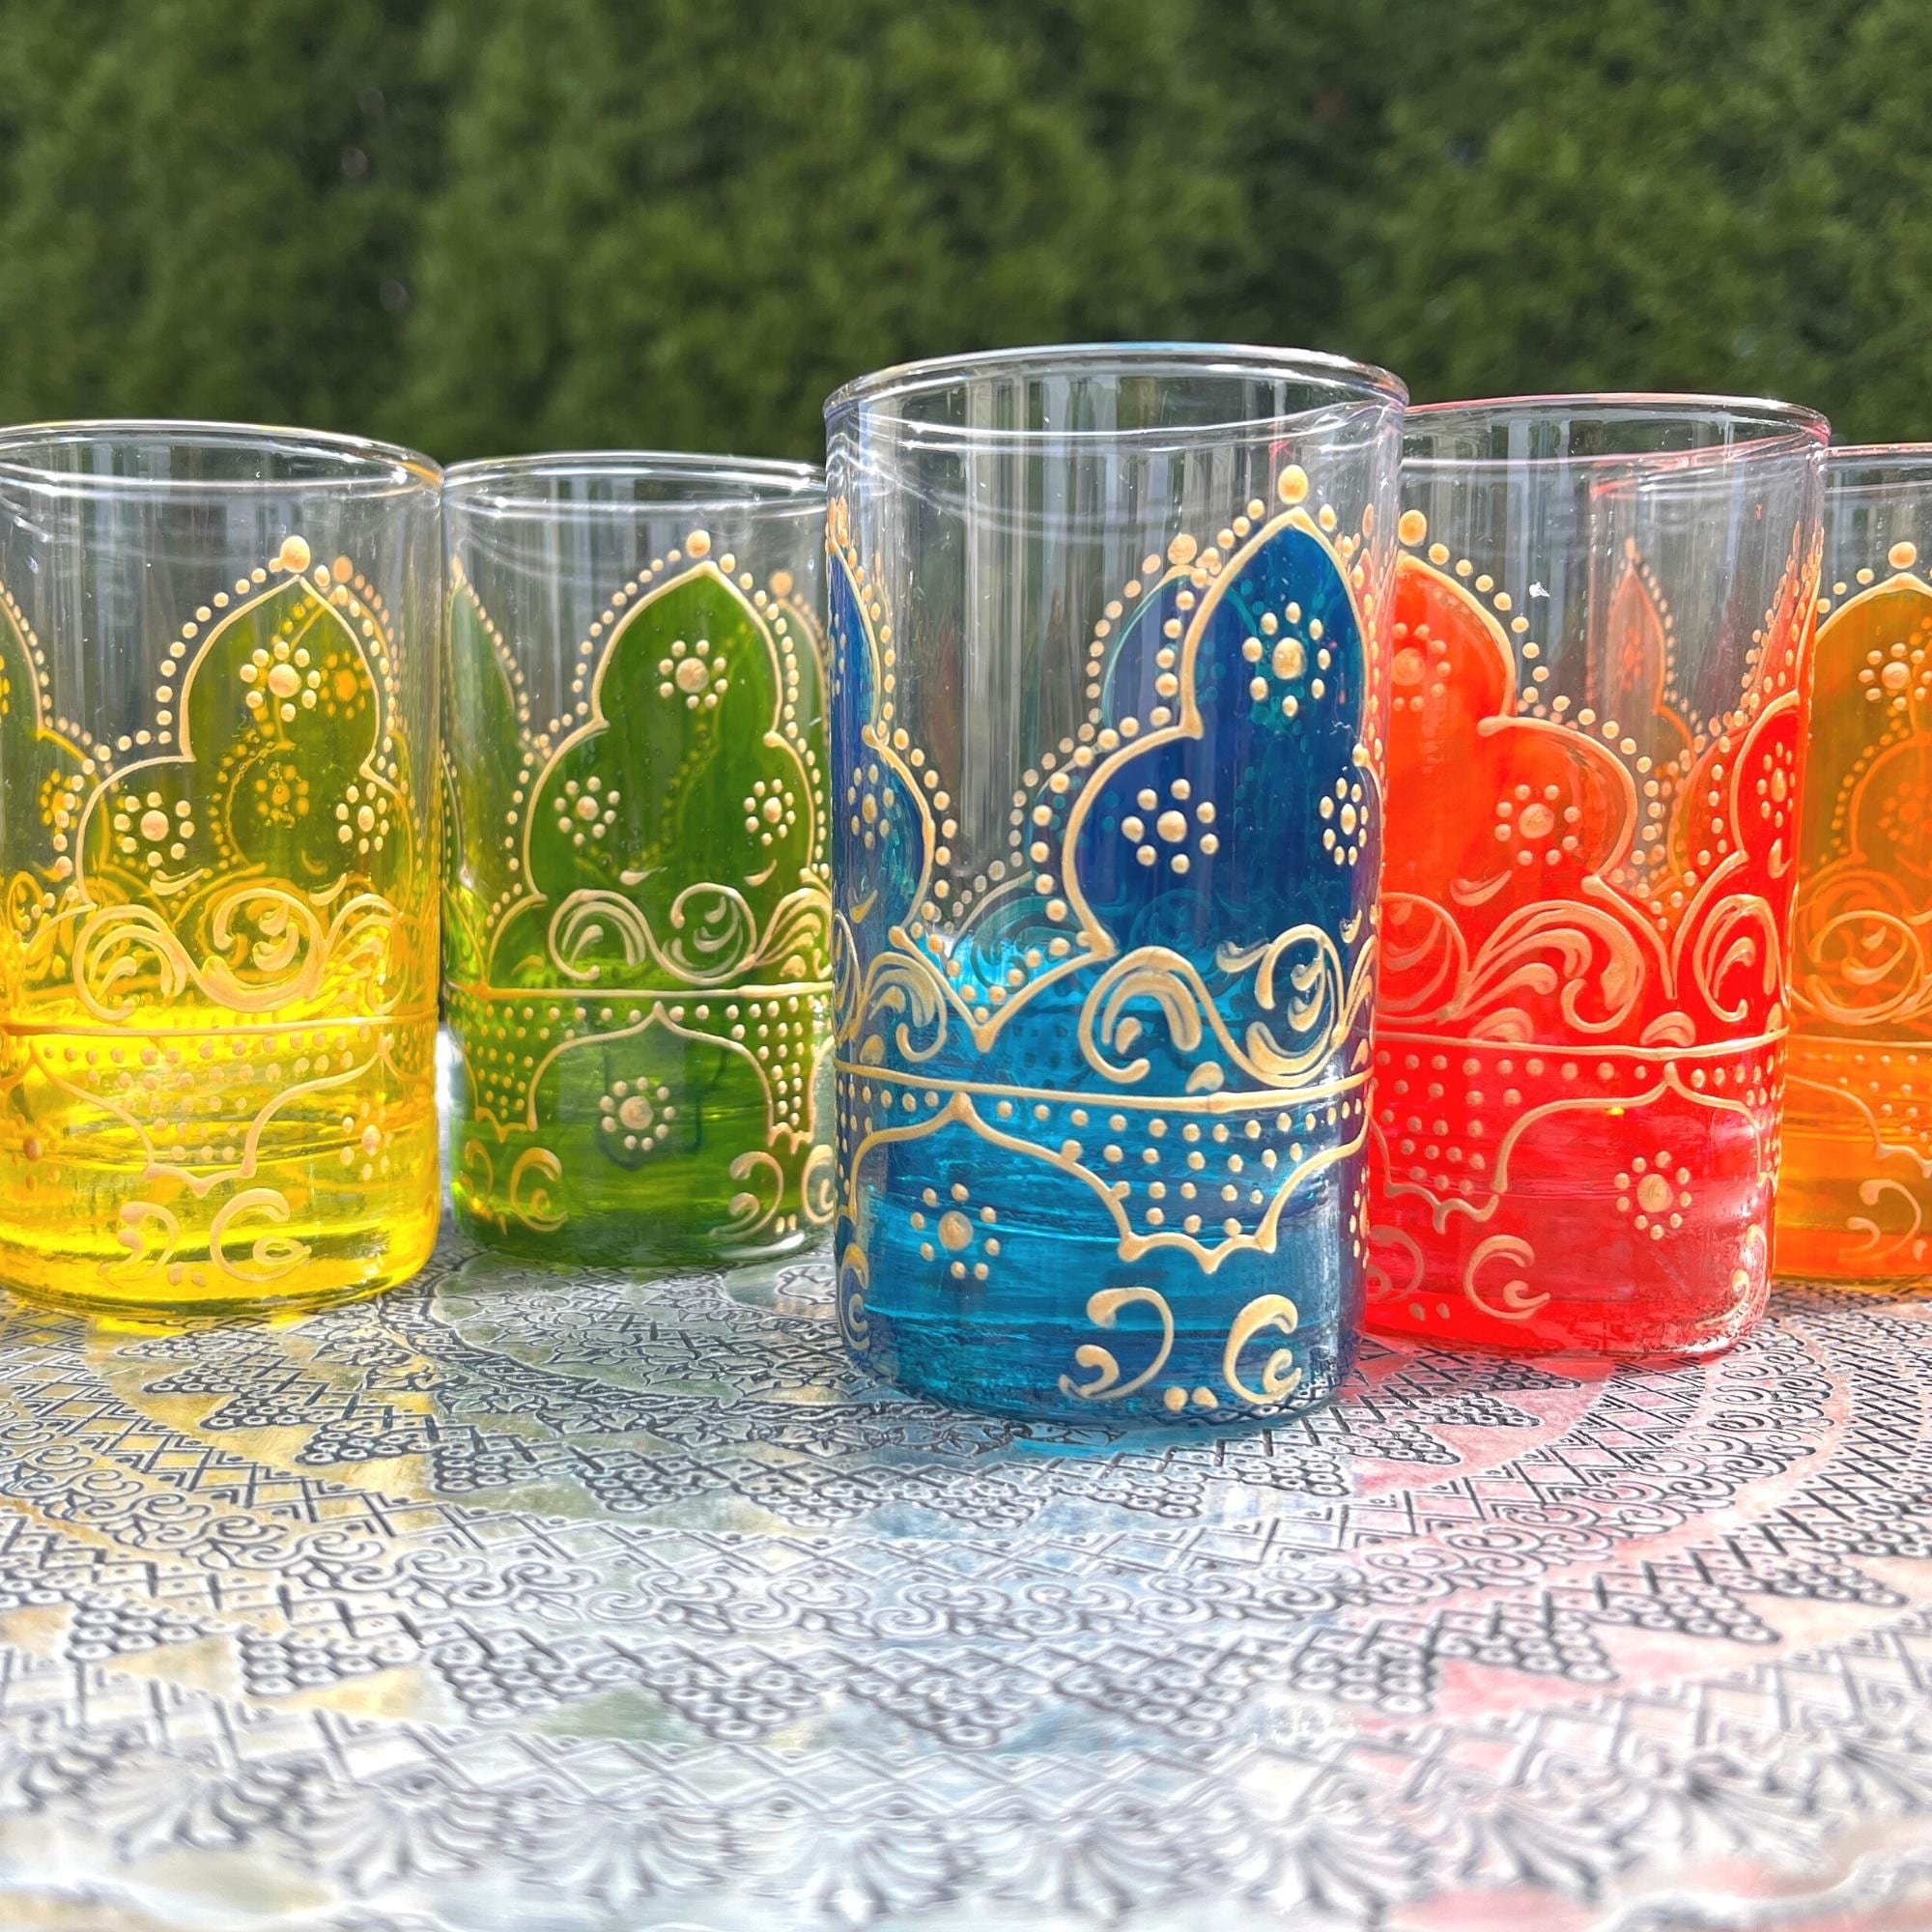 https://ak1.ostkcdn.com/images/products/is/images/direct/f19fa09e95e10f8289b19108495c007fa92d42f7/Set-of-6-Handmade-Arabesque-Style-Tea-Glasses-%28Tunisia%29.jpg